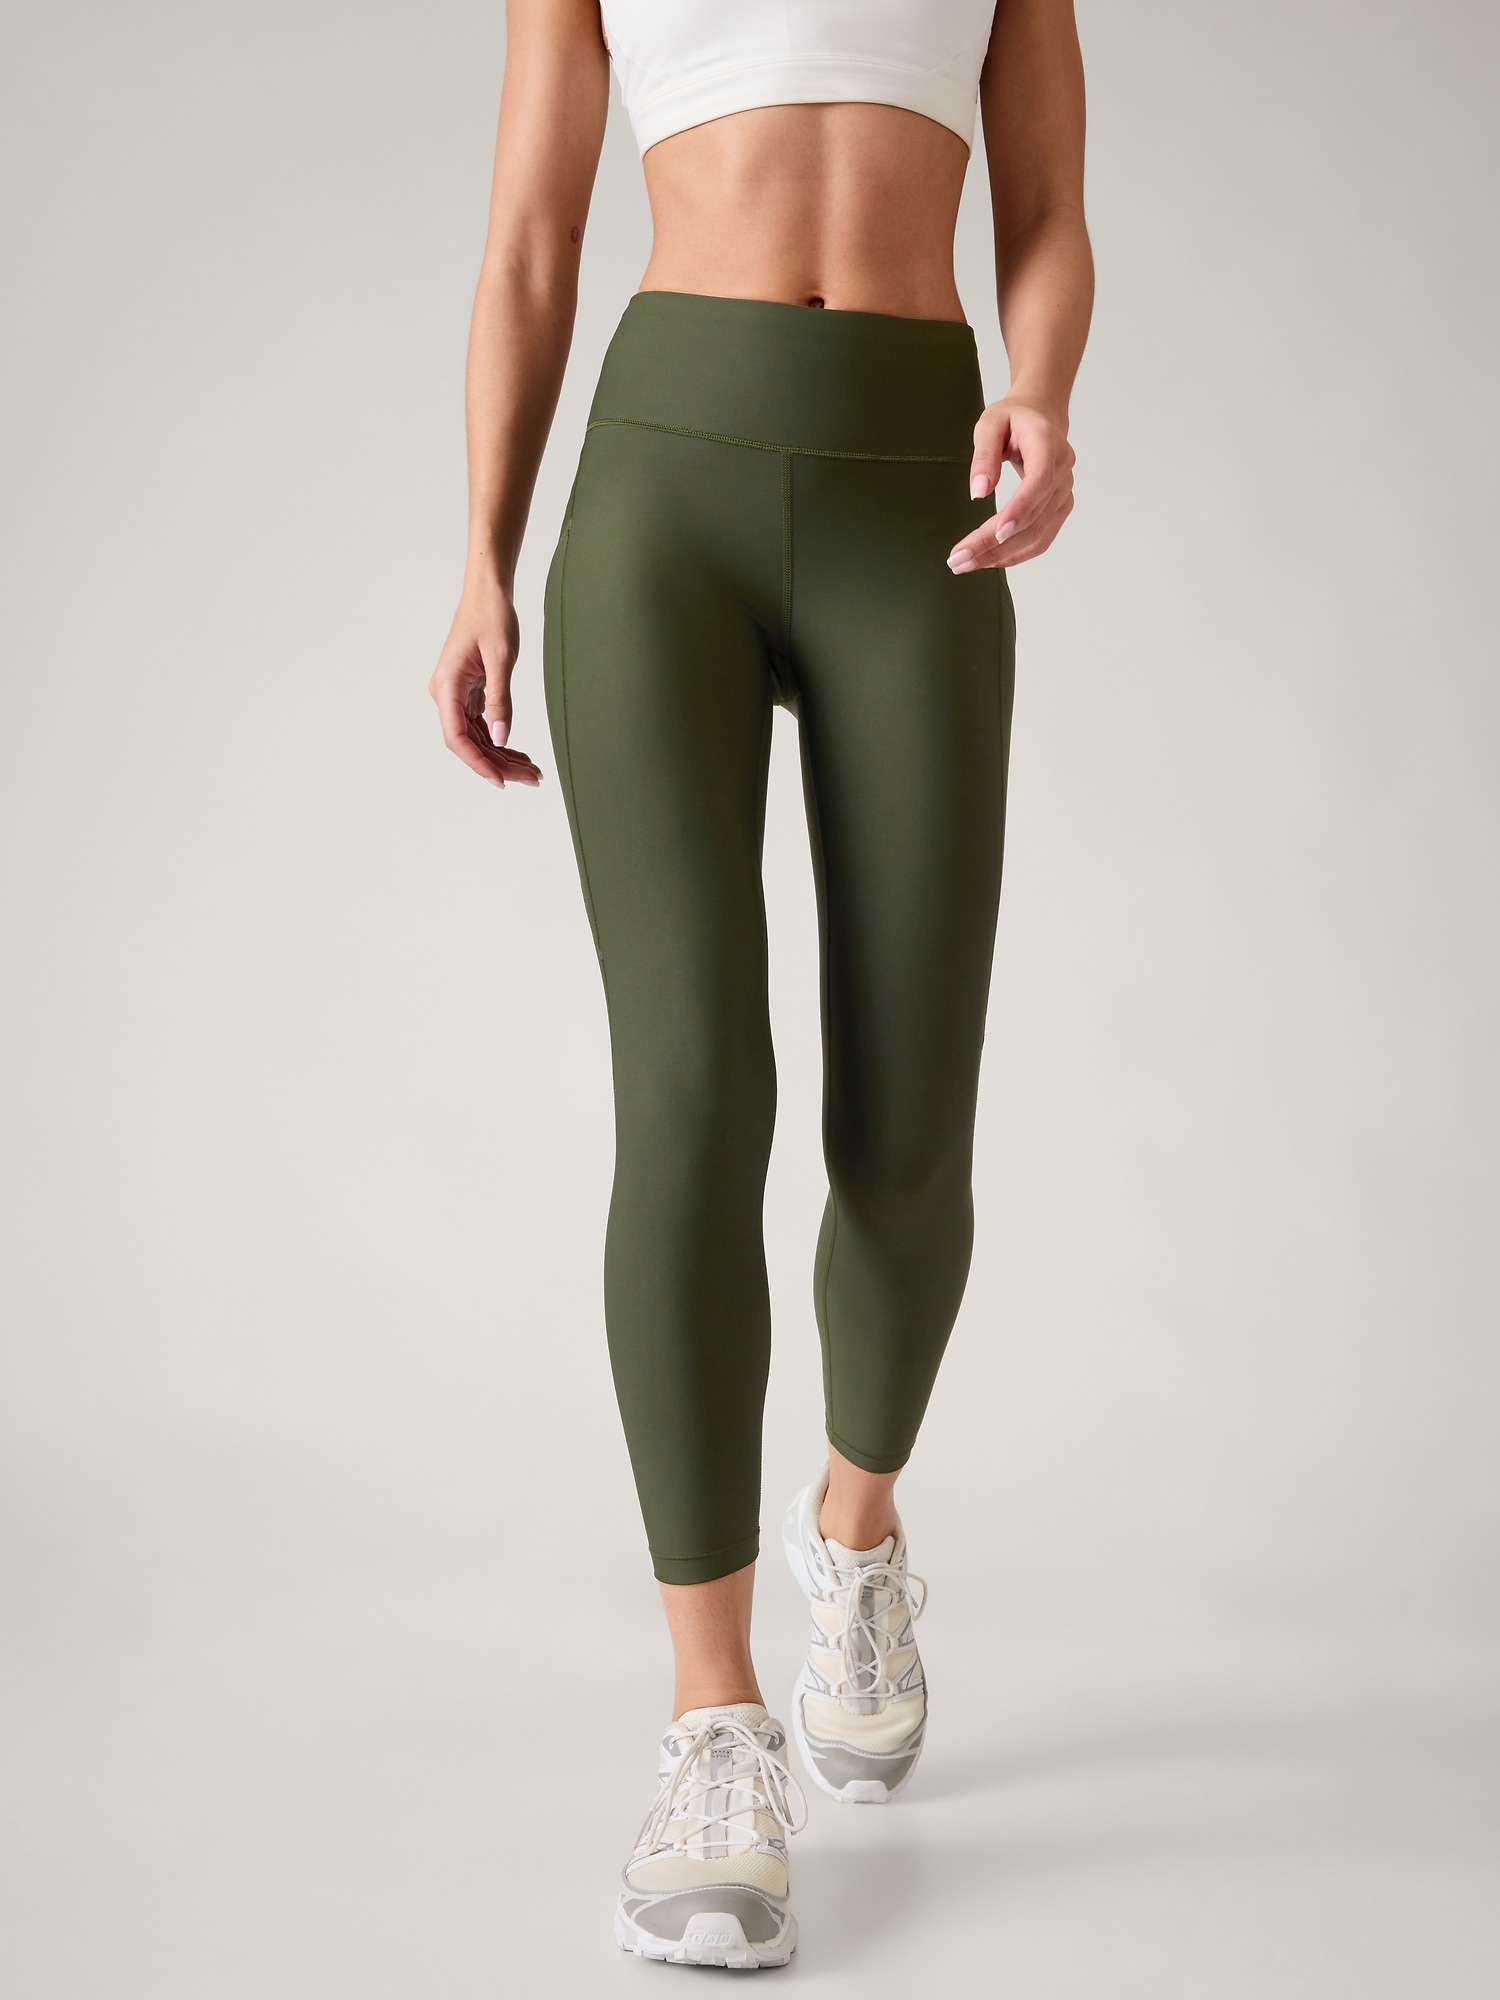 Athleta Blue Elation Crop Leggings- Size XS (Inseam 15) – The Saved  Collection